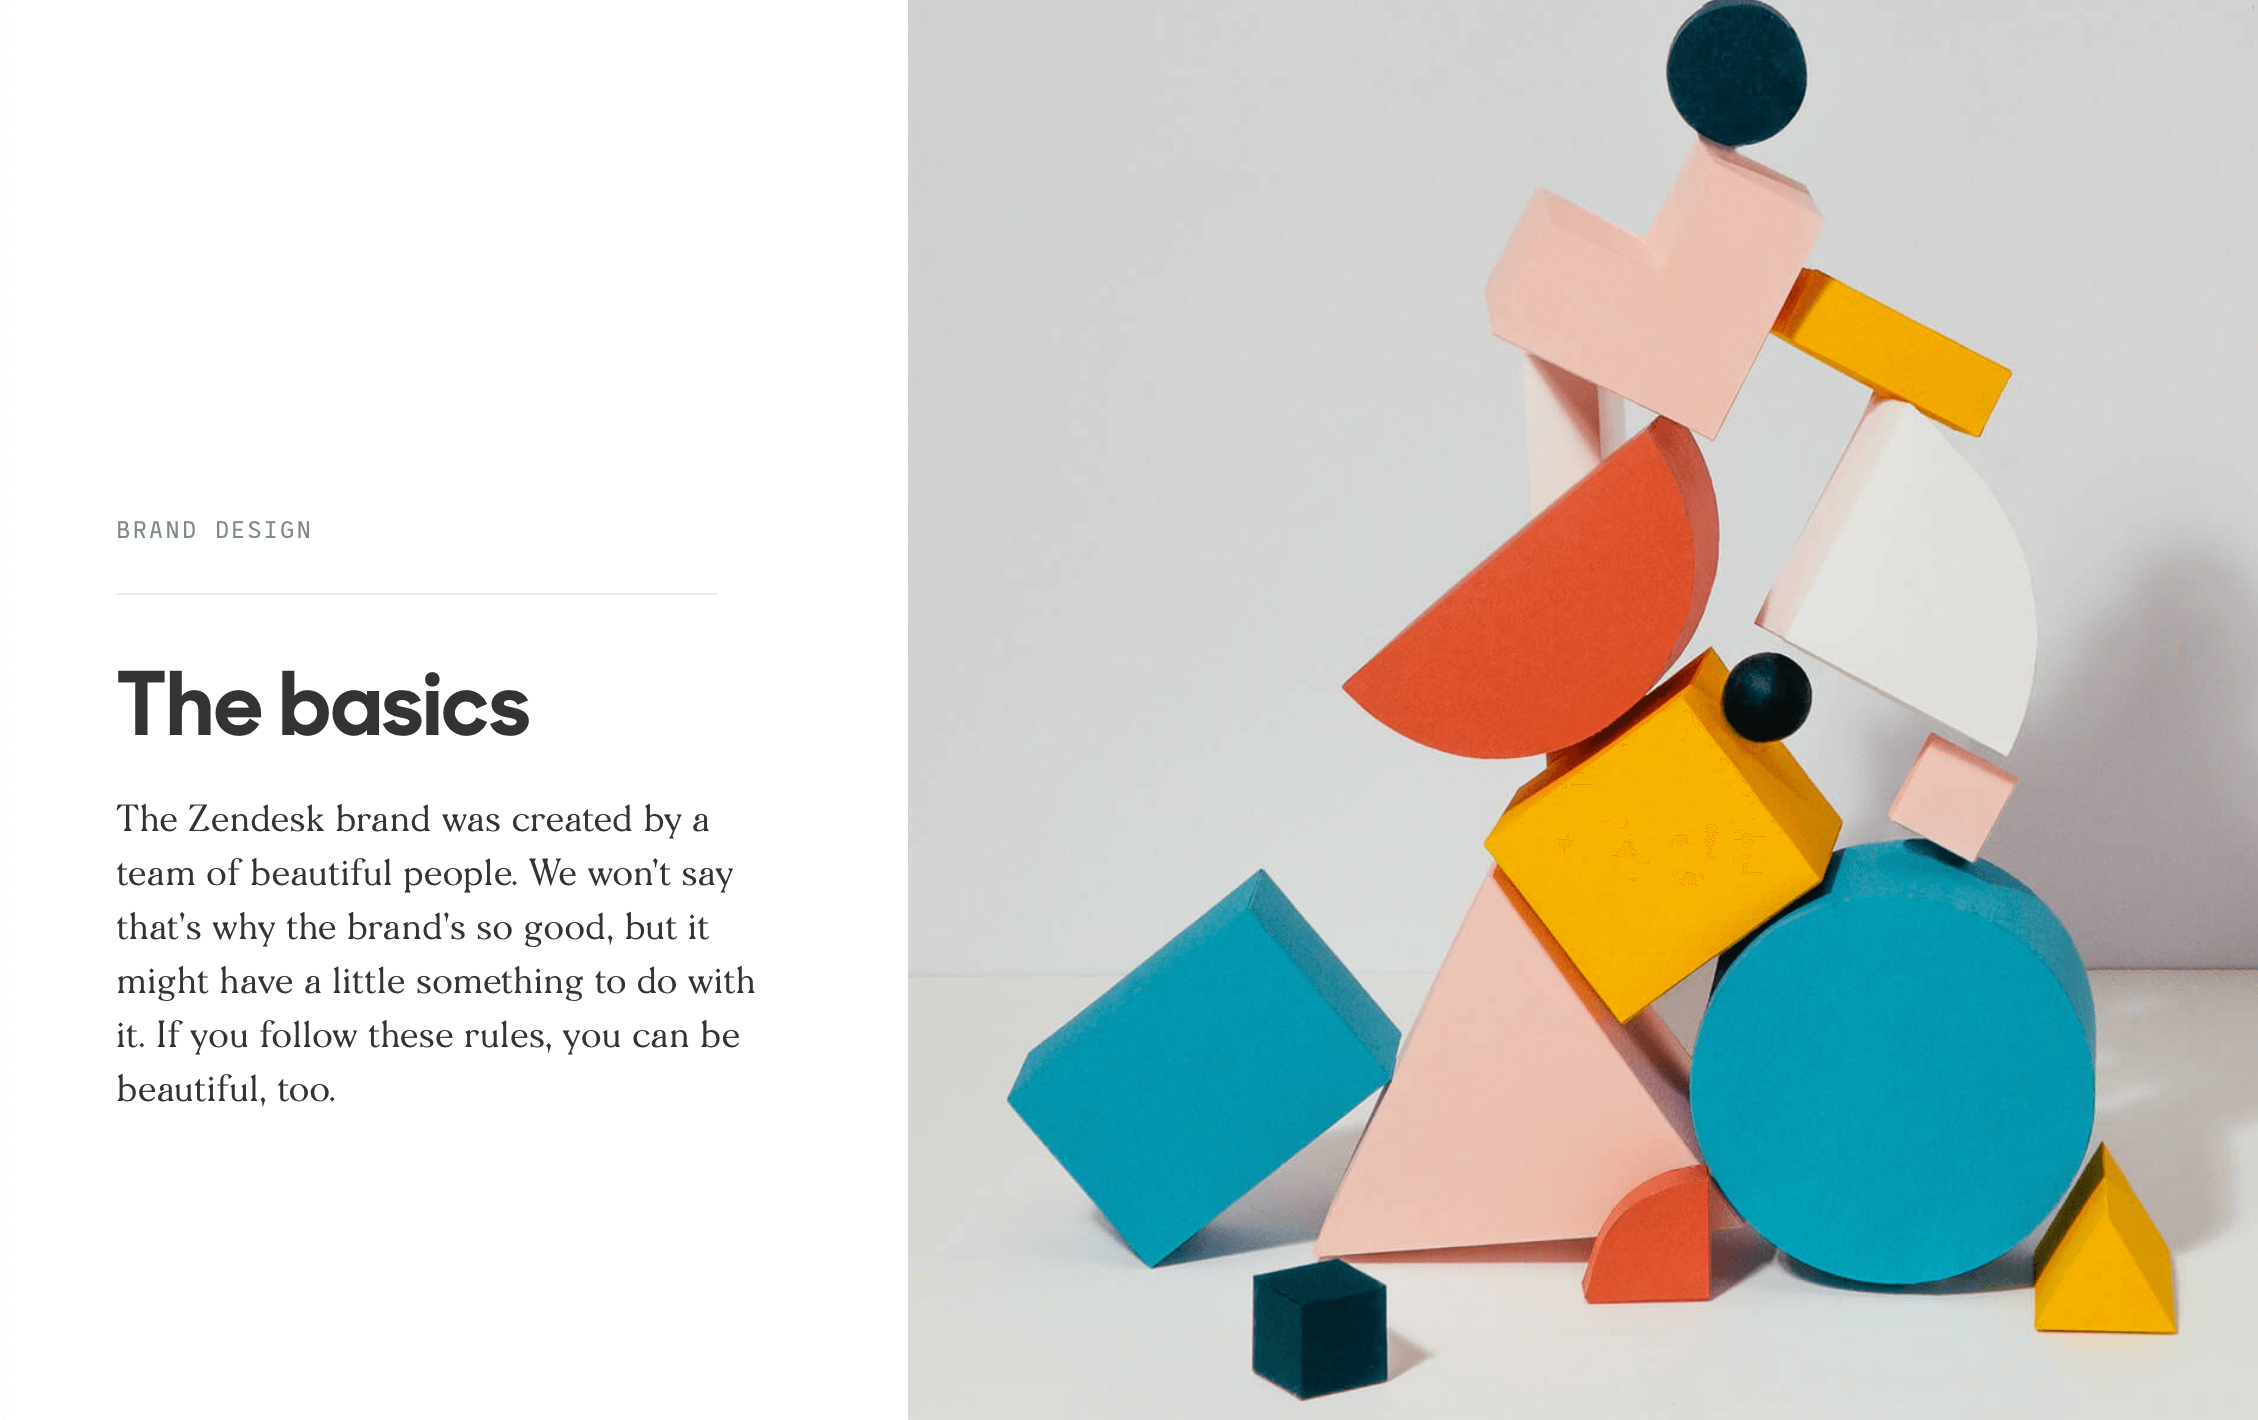 The Brand Design Basics page of the Zendesk brand guide